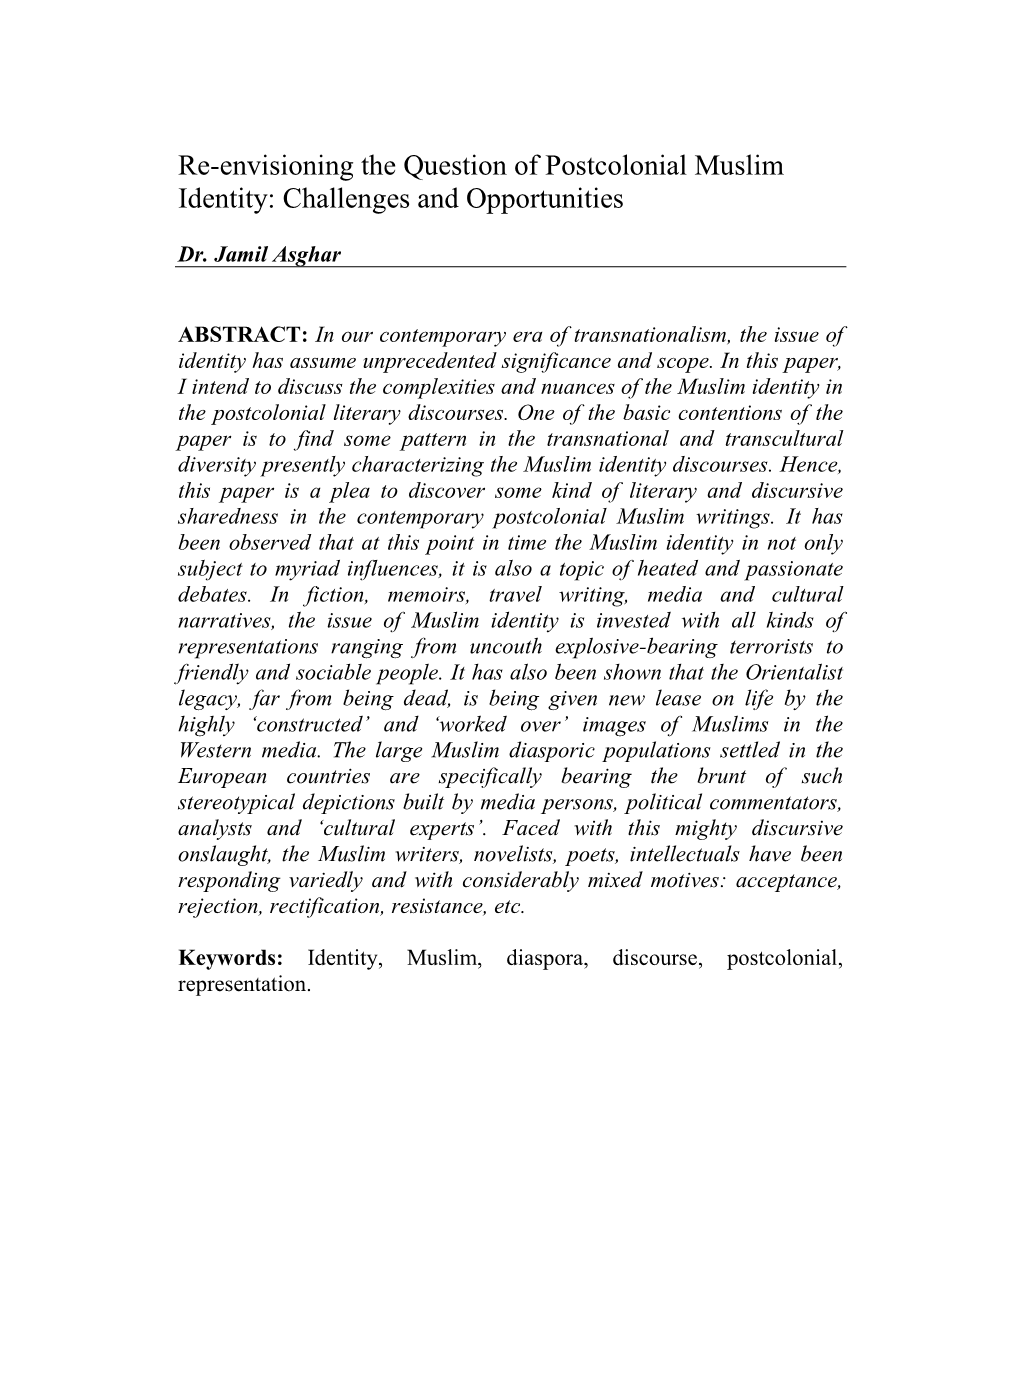 Re-Envisioning the Question of Postcolonial Muslim Identity: Challenges and Opportunities